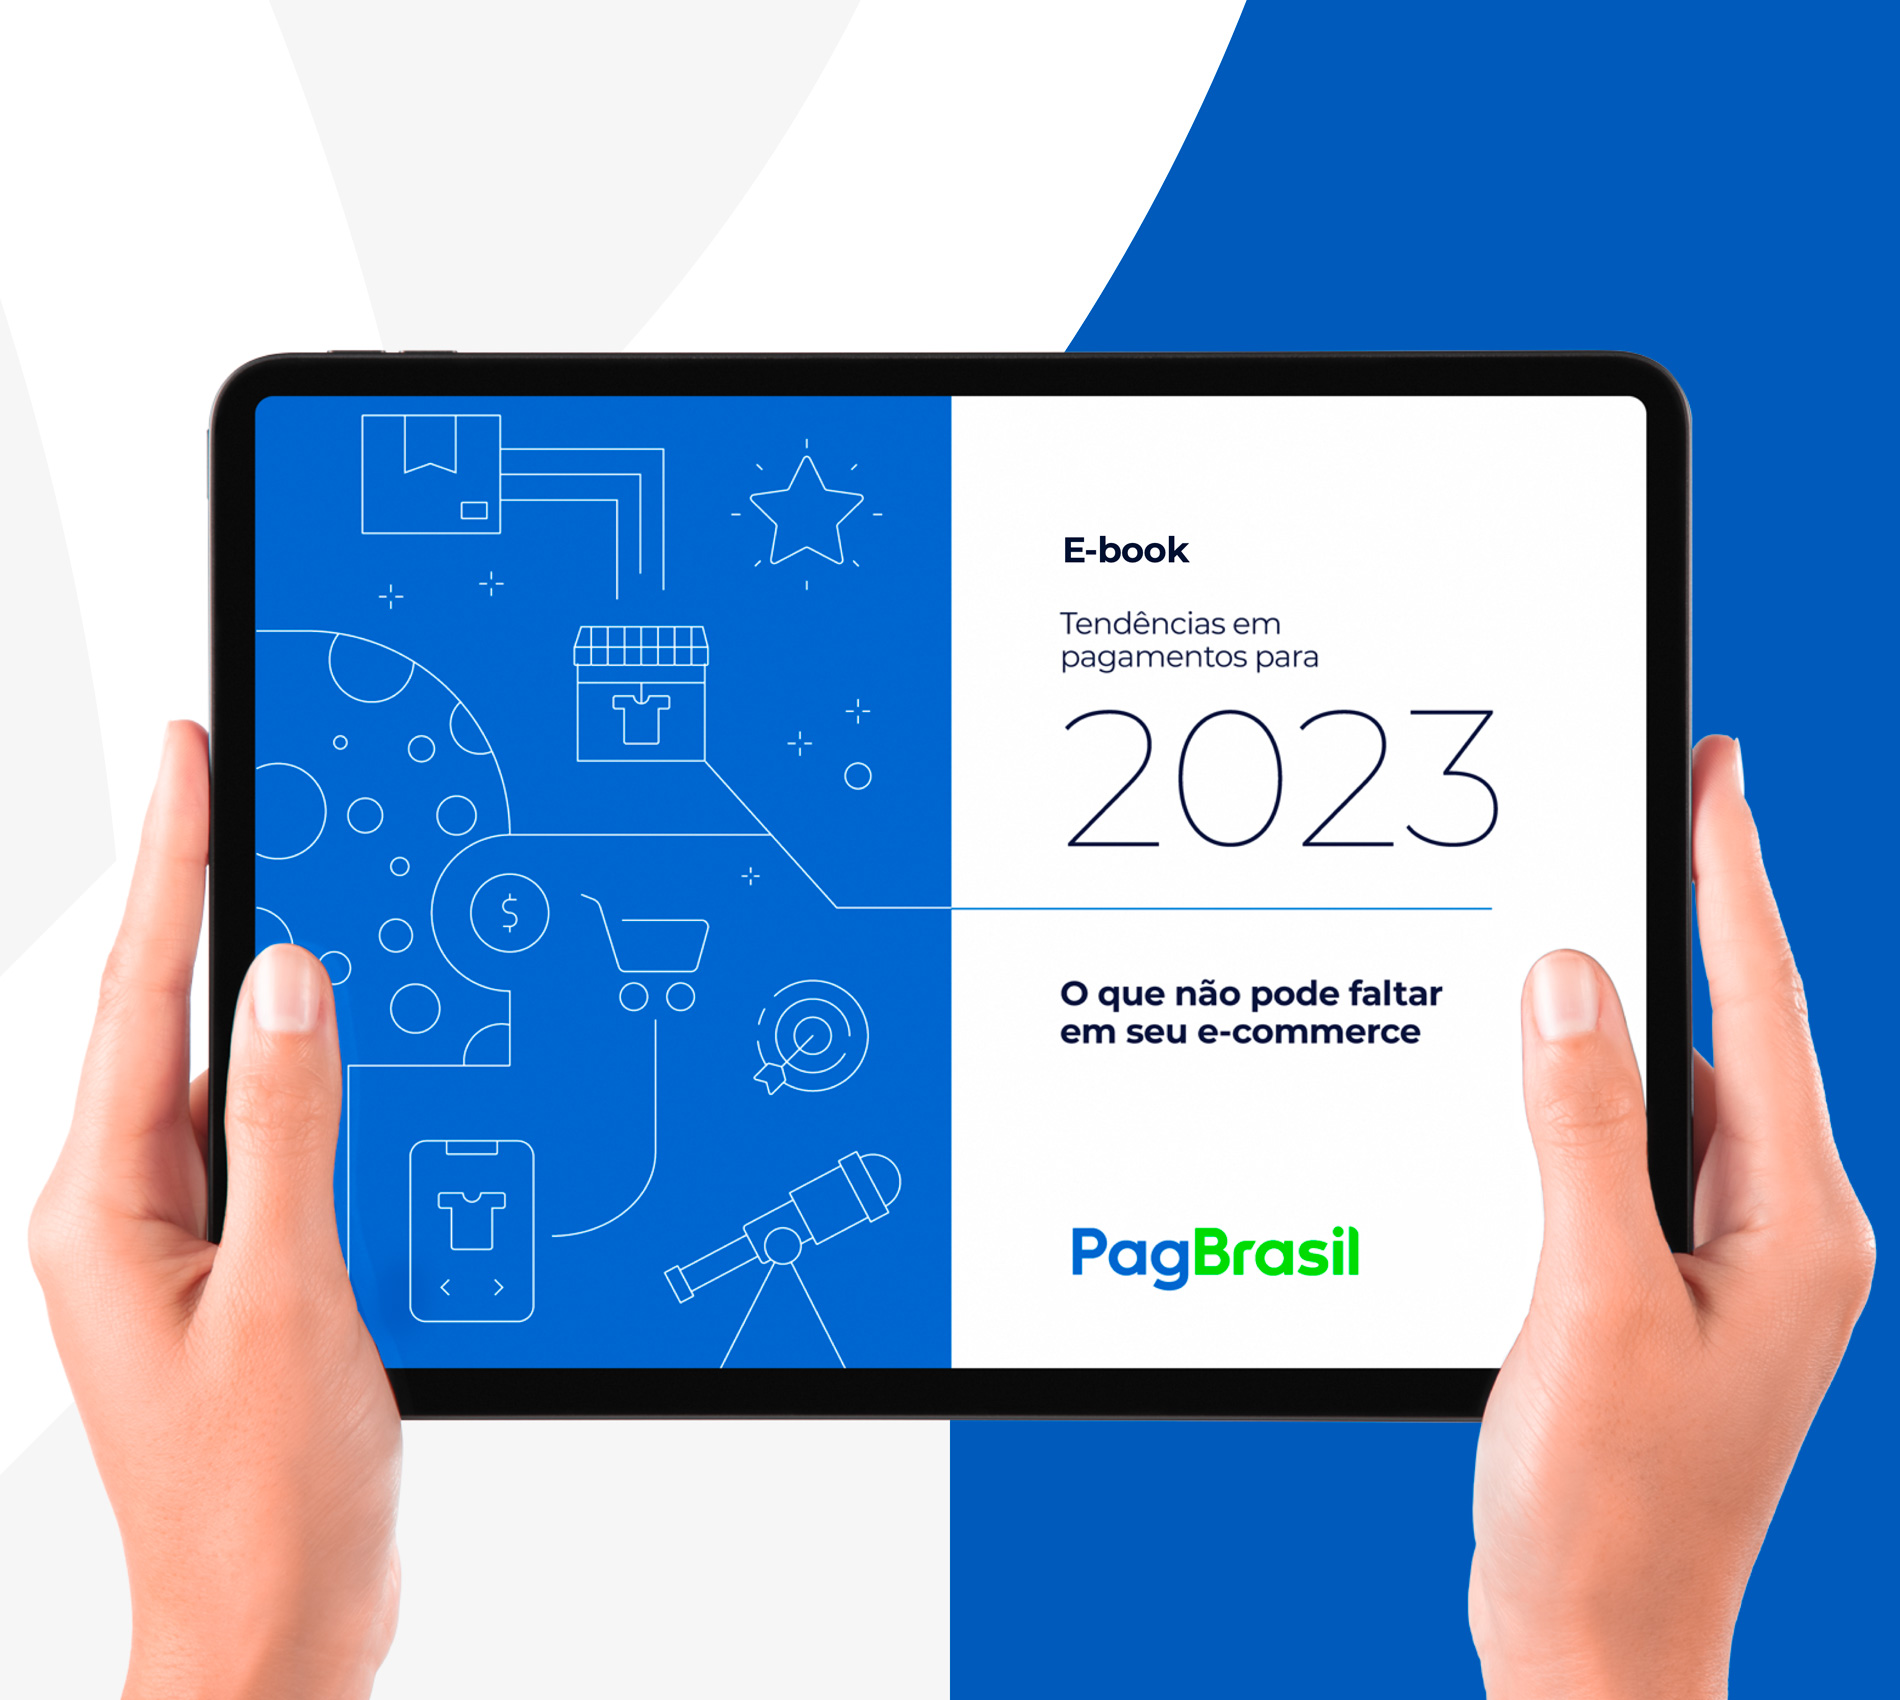 Payment trends for 2023: boost conversion rates in Brazil